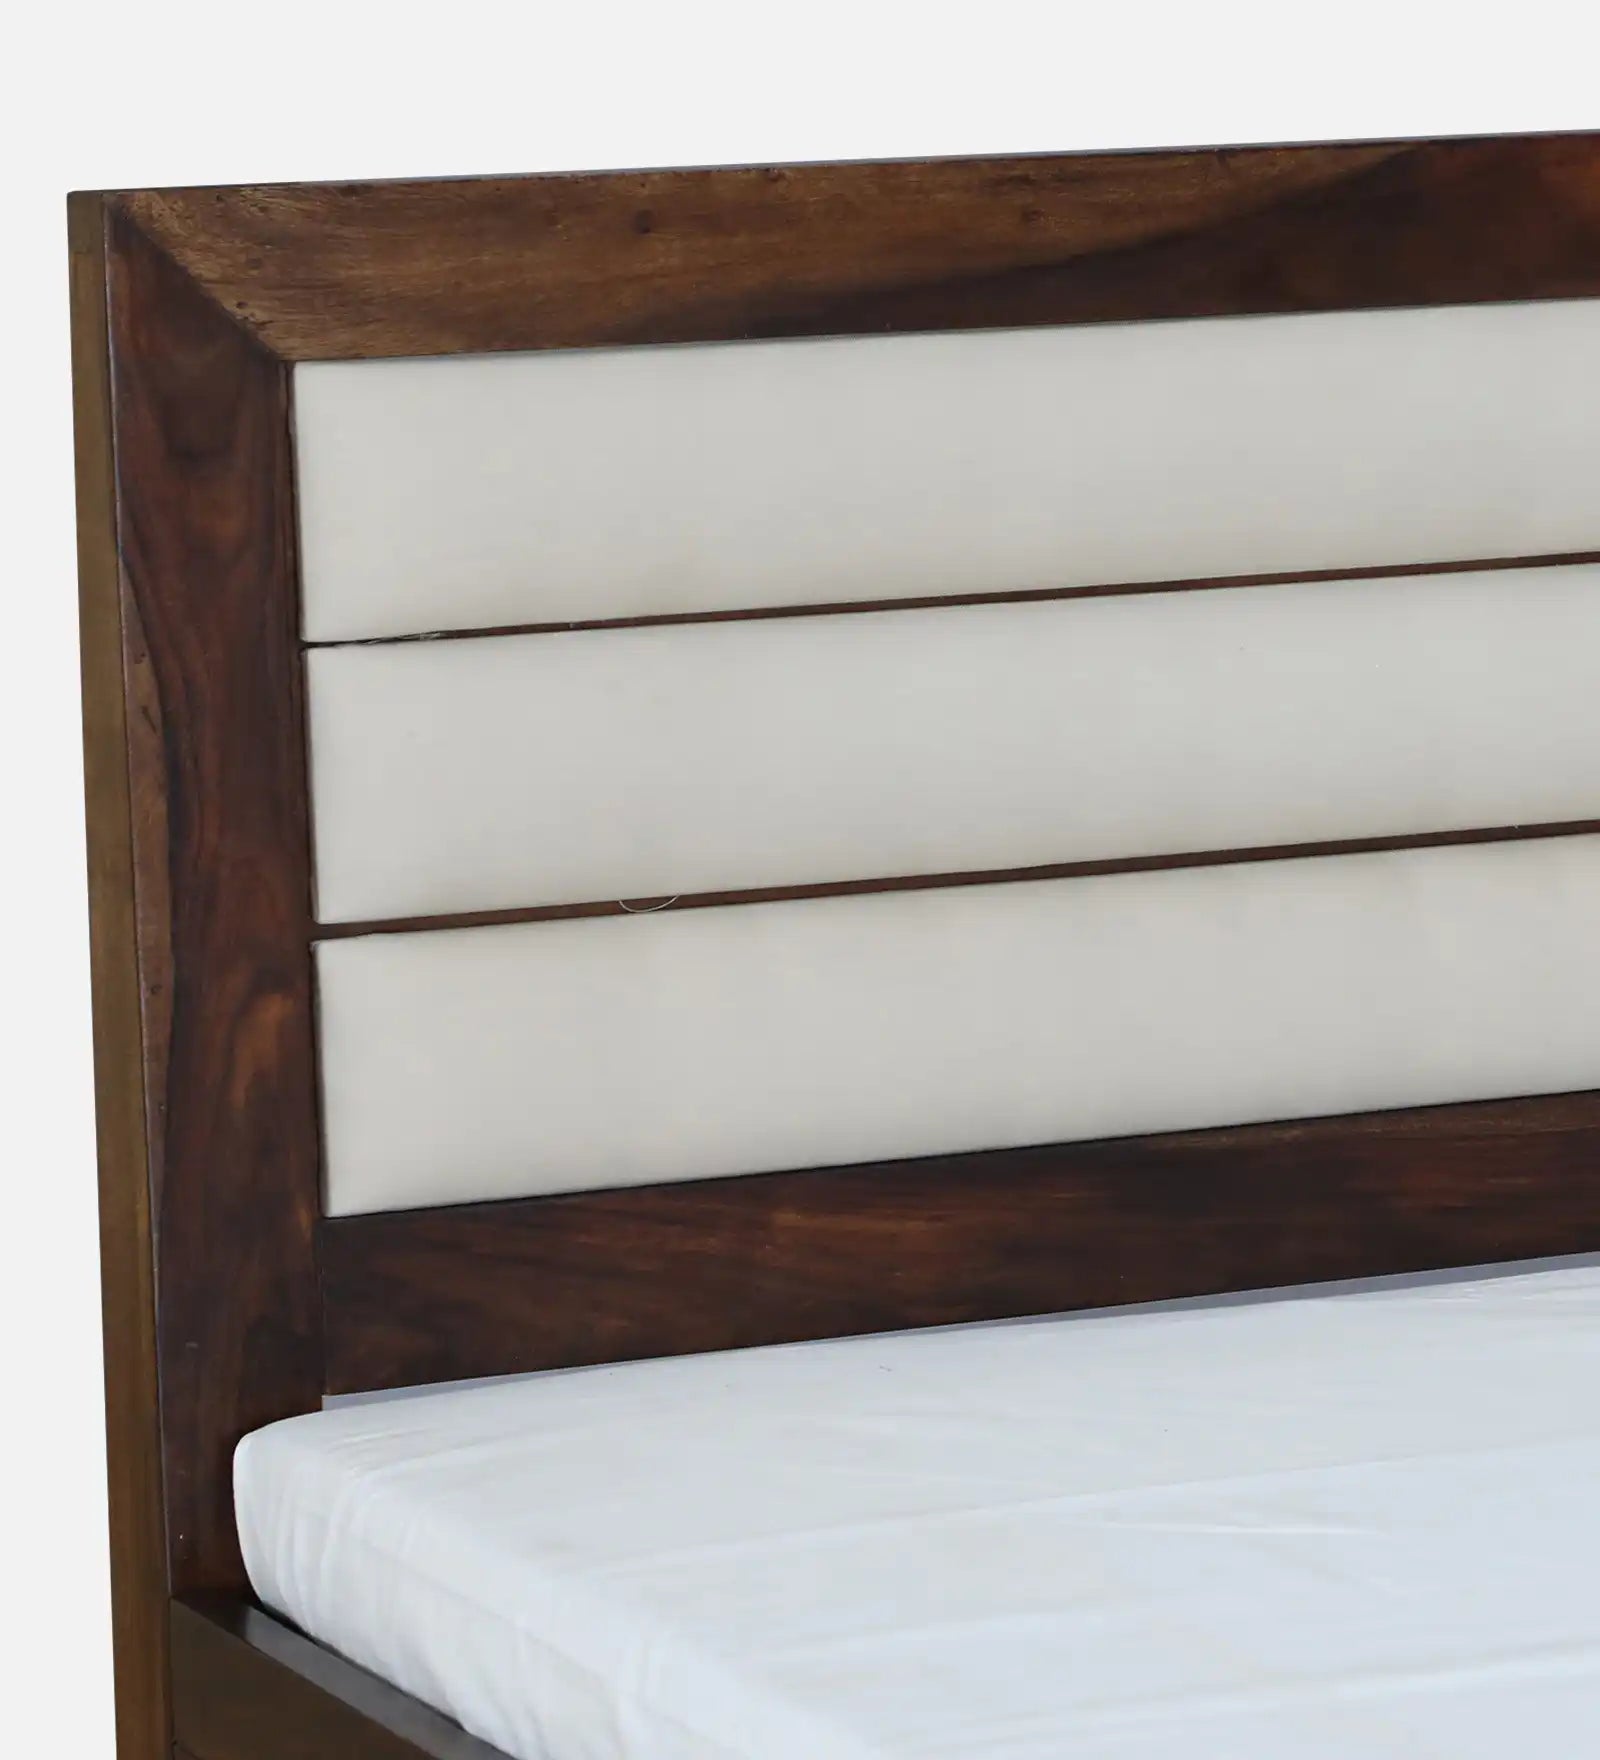 Moscow Sheesham Wood King Size Beds